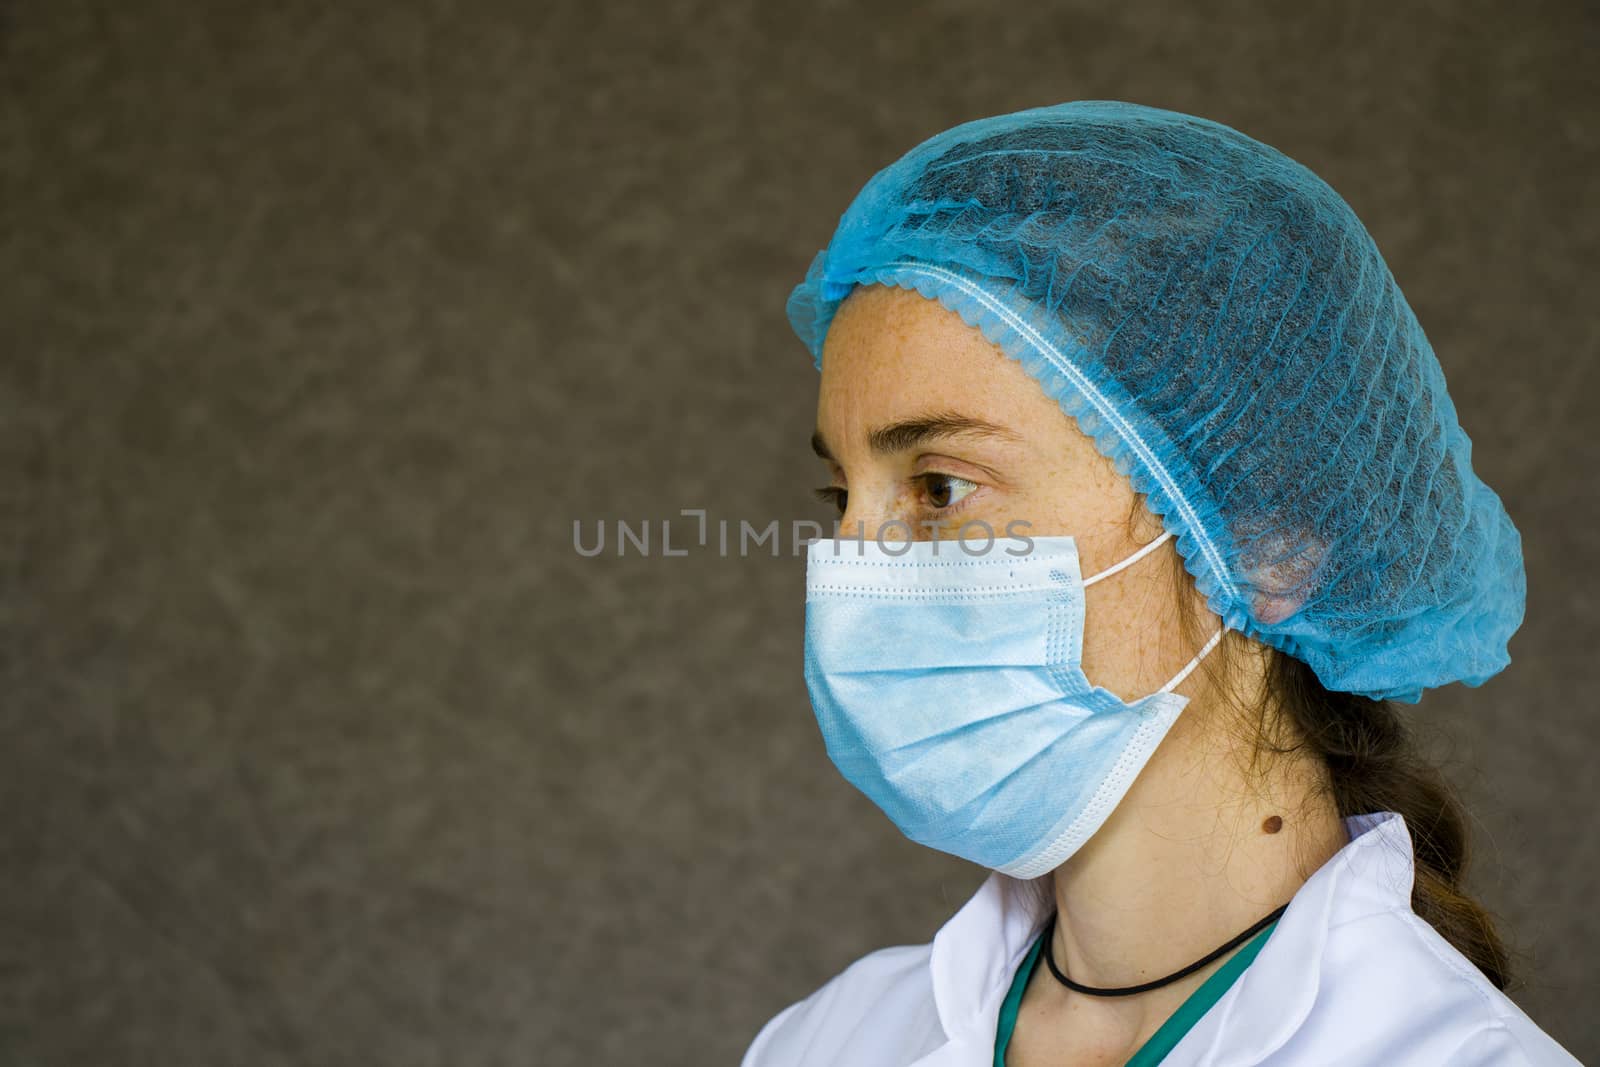 Doctor or nurse form, woman portrait in medical uniform, mask, glove and surgical cap by Taidundua